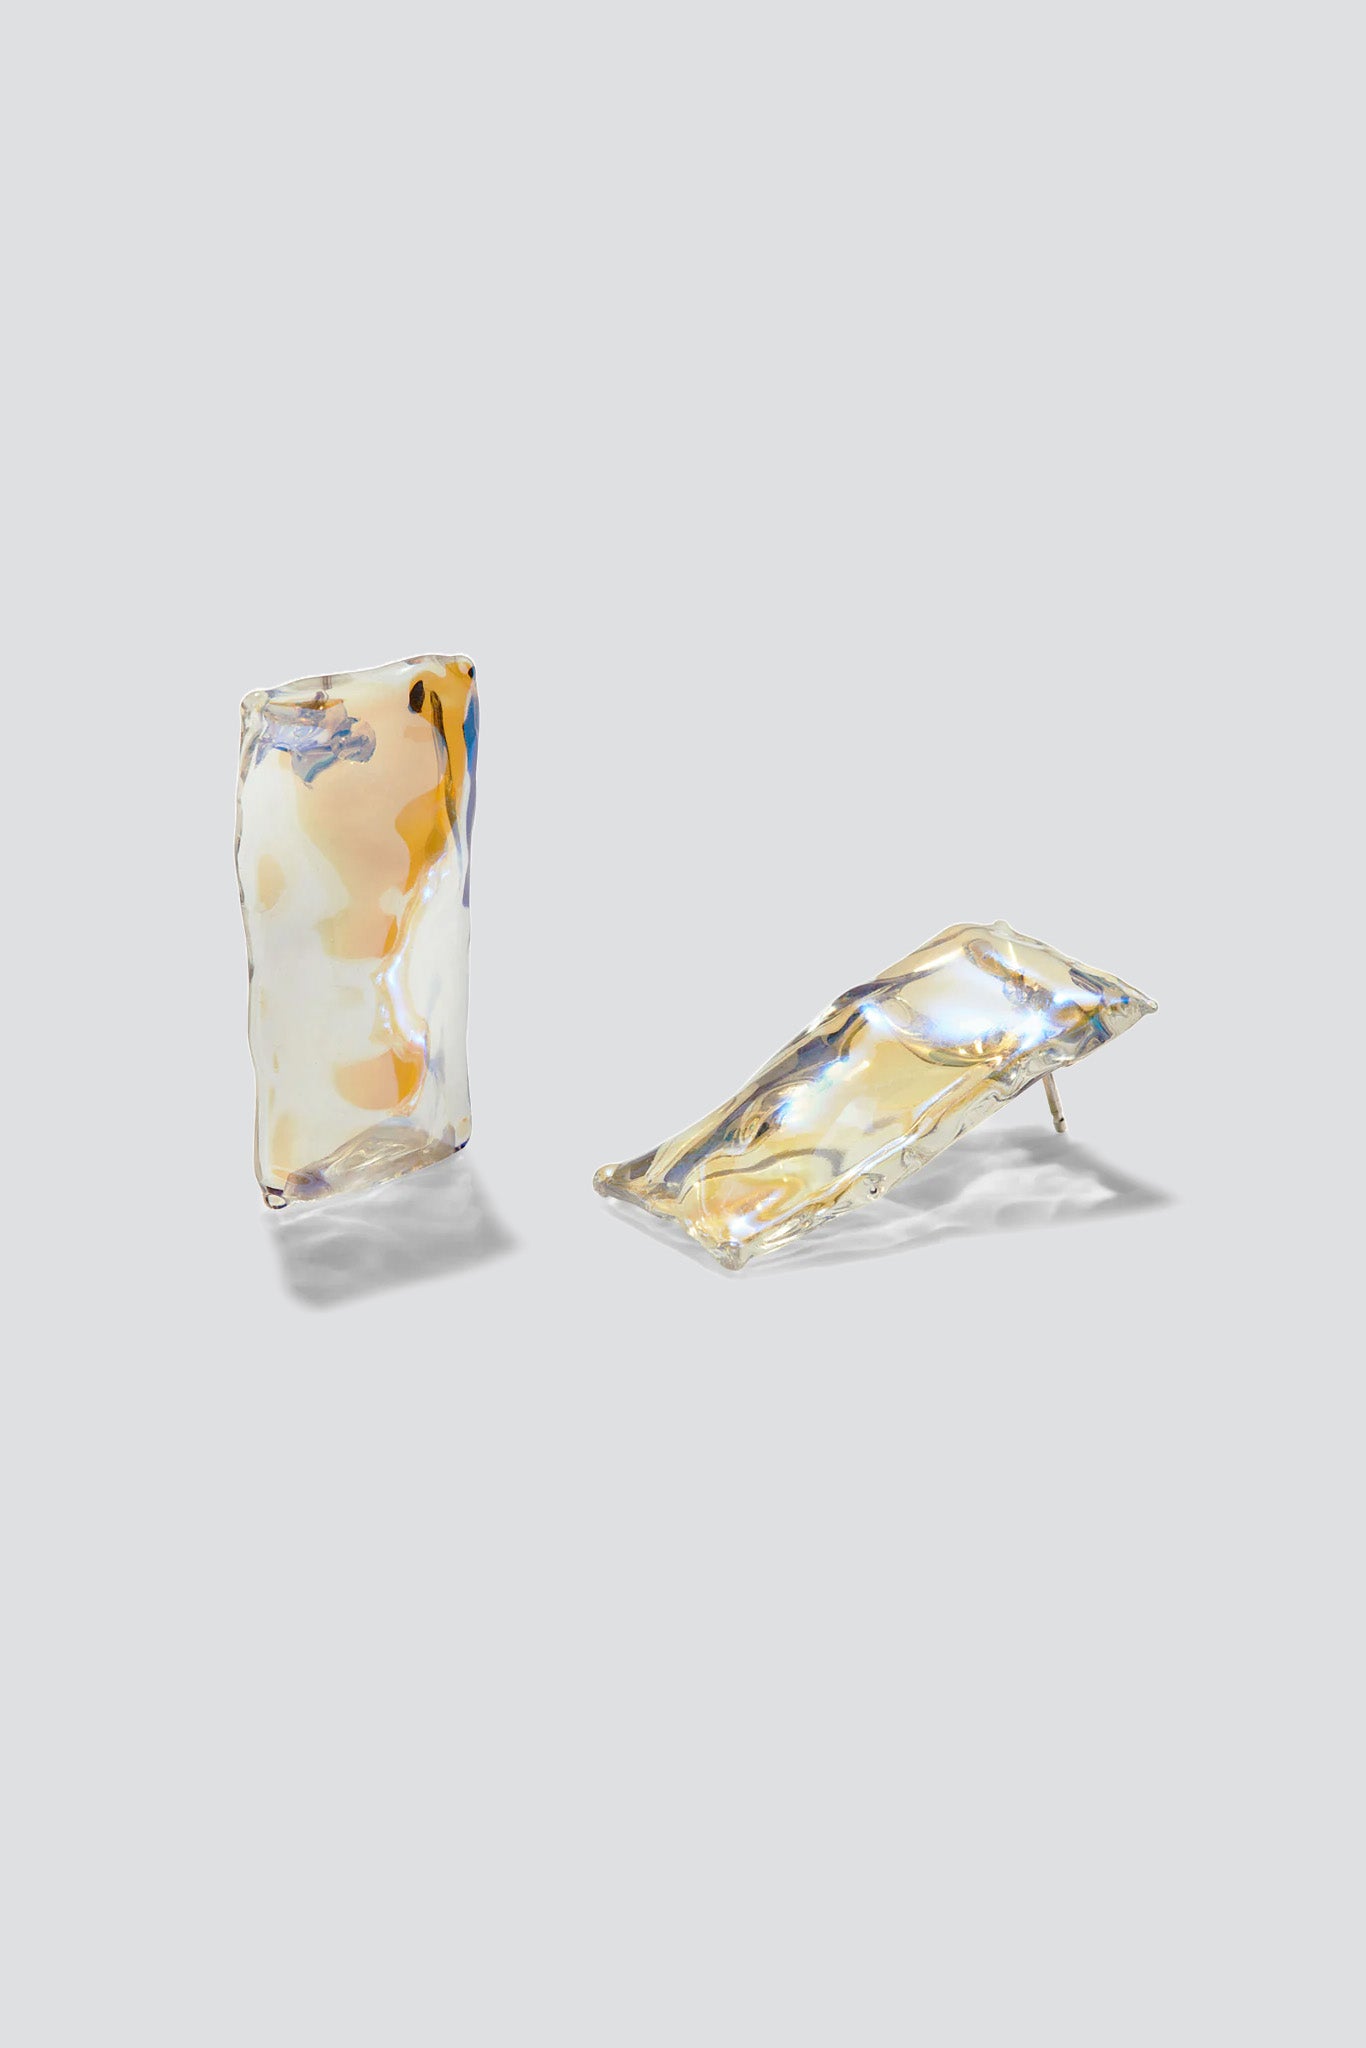 Iridescent Glass River Enigma Earrings